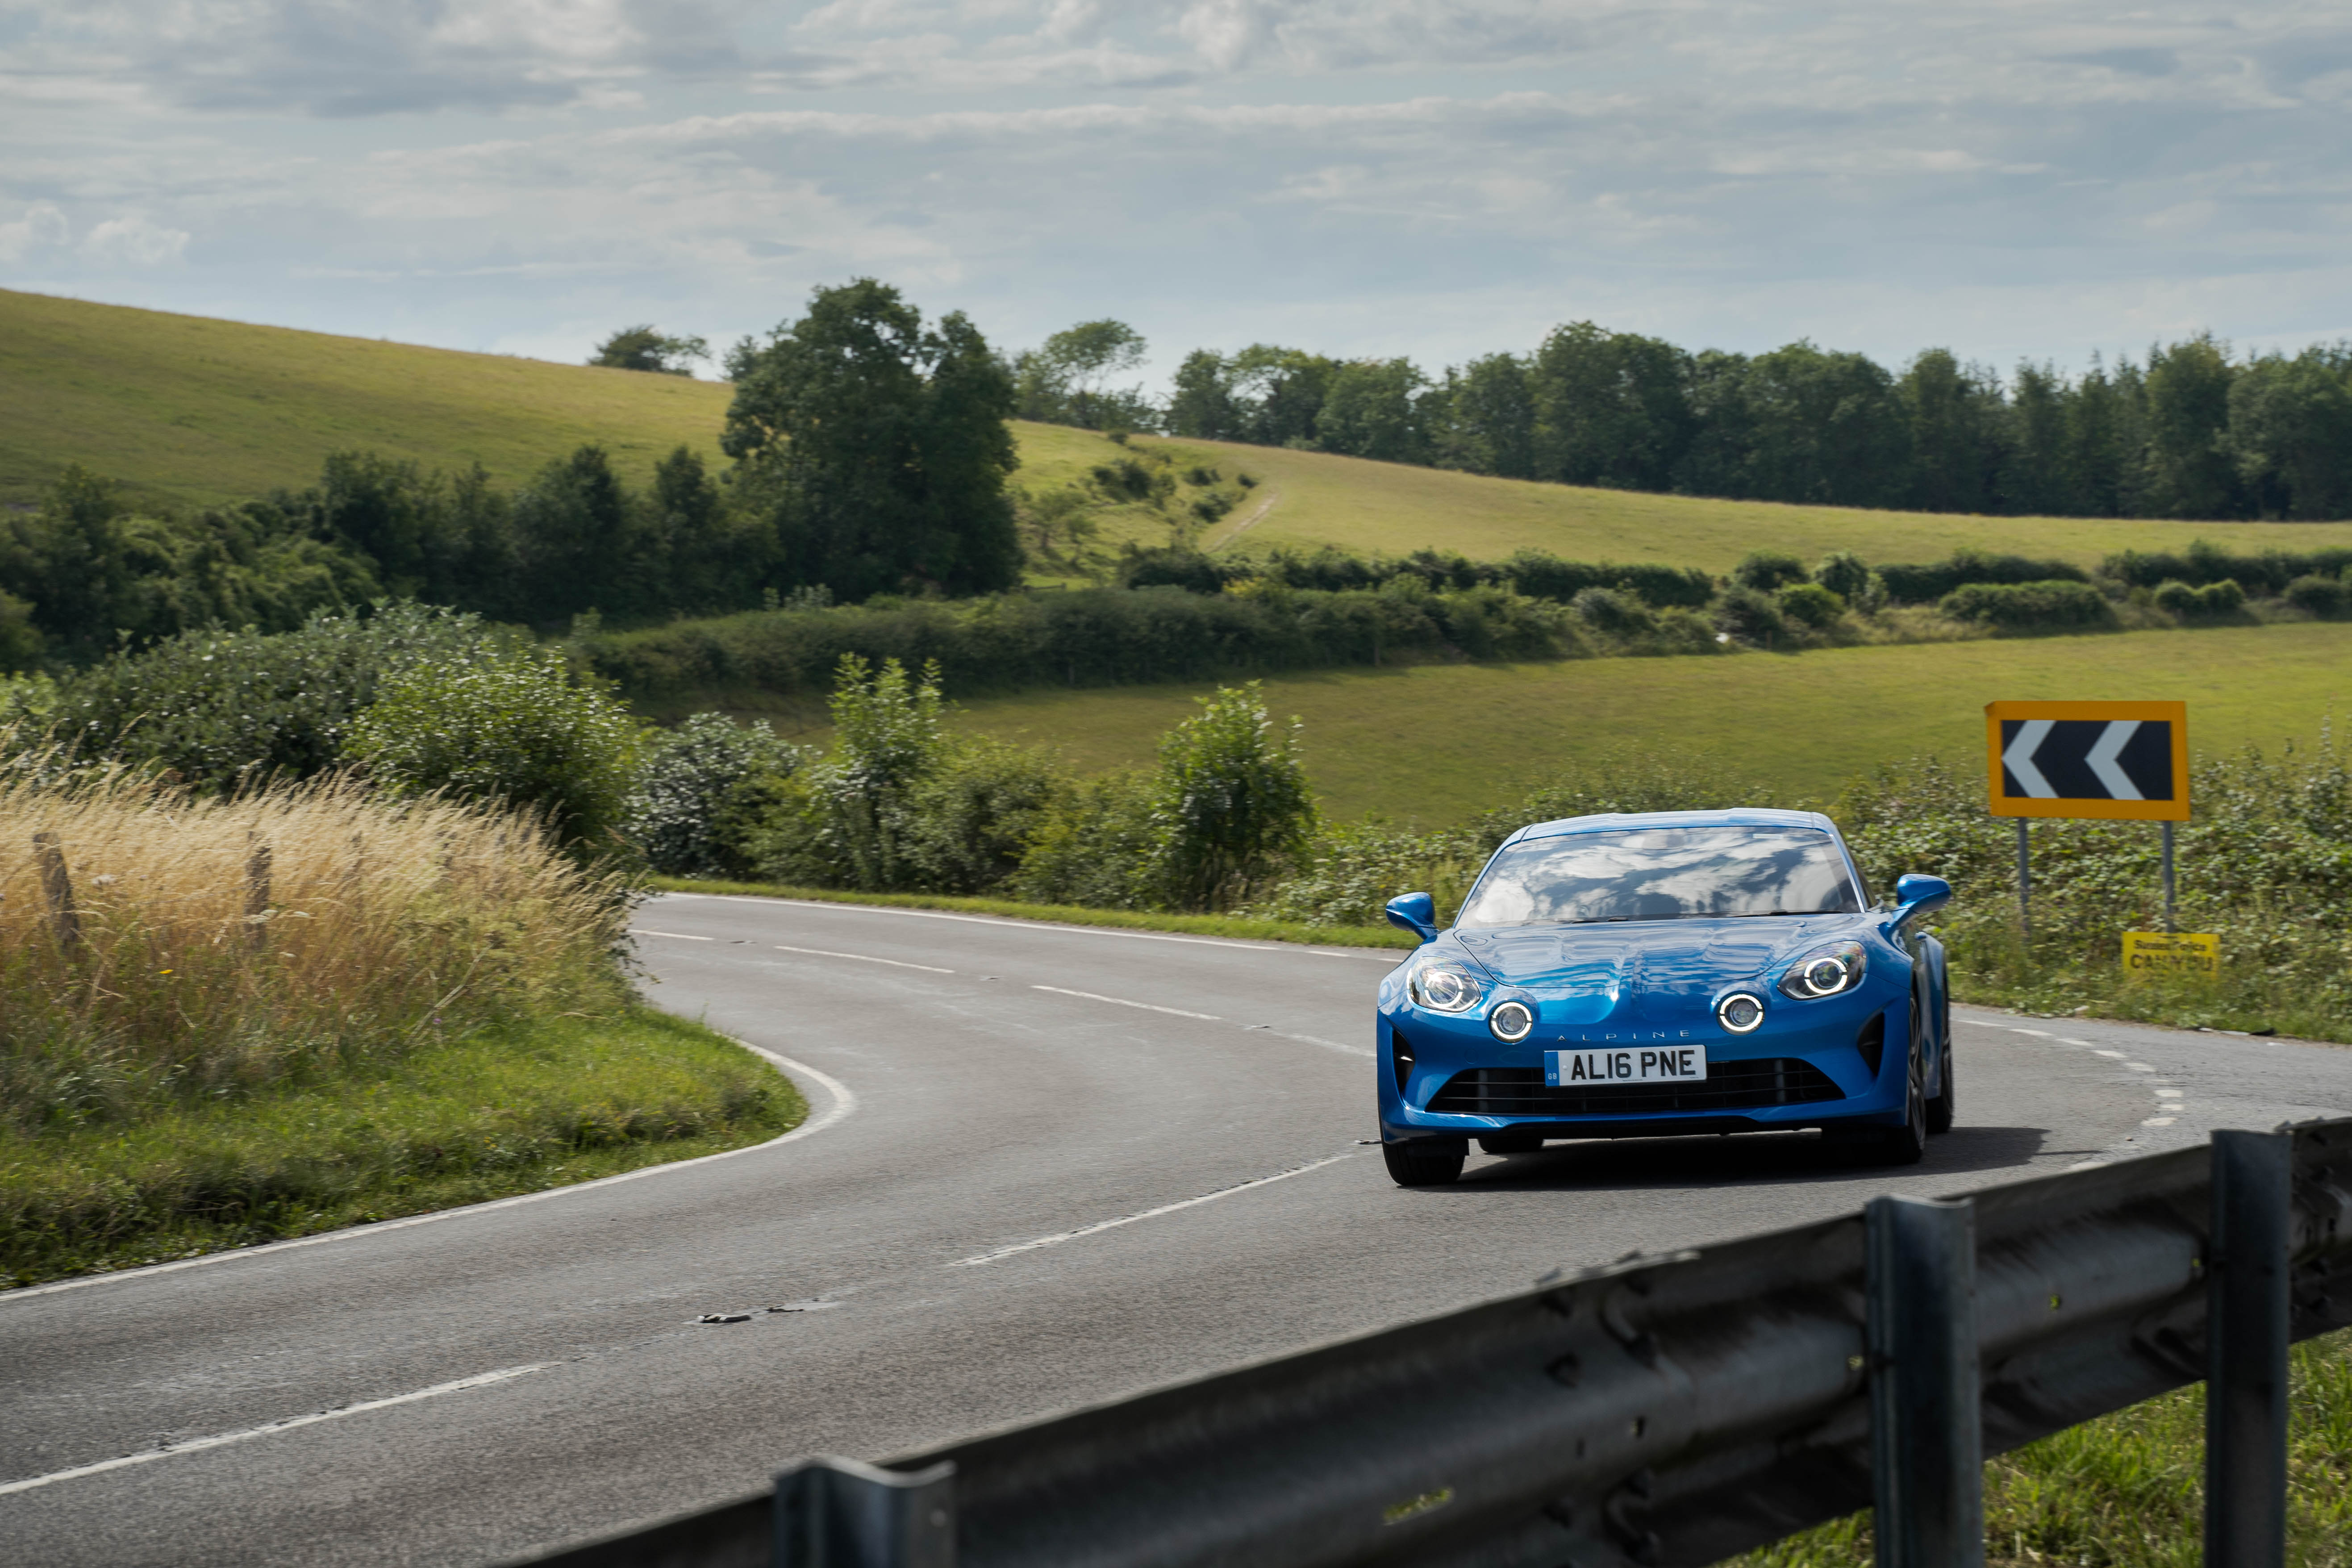 The A110 comes to life in the bends